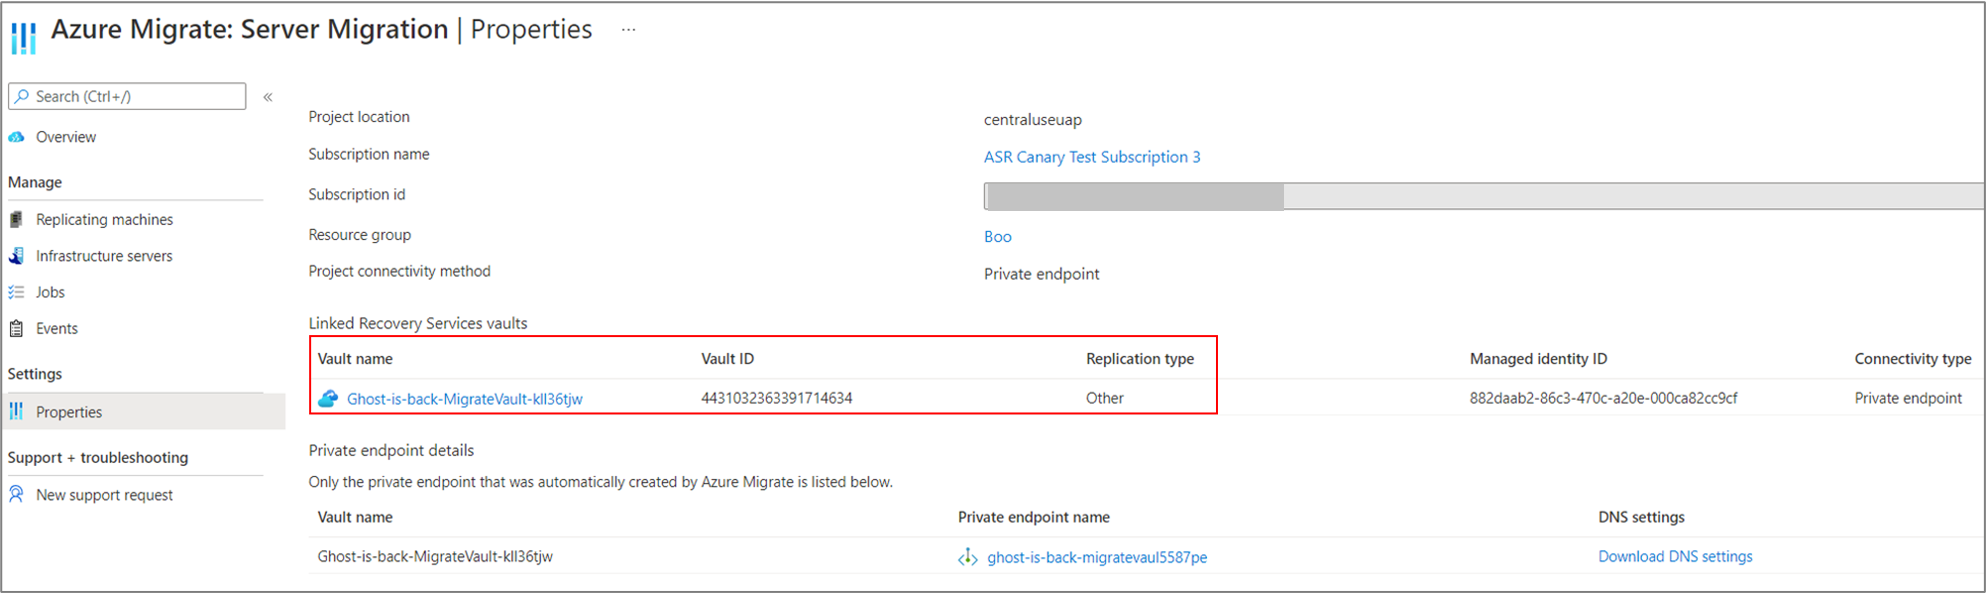 Screenshot that shows the Azure Migrate: Server Migration tool Properties page.